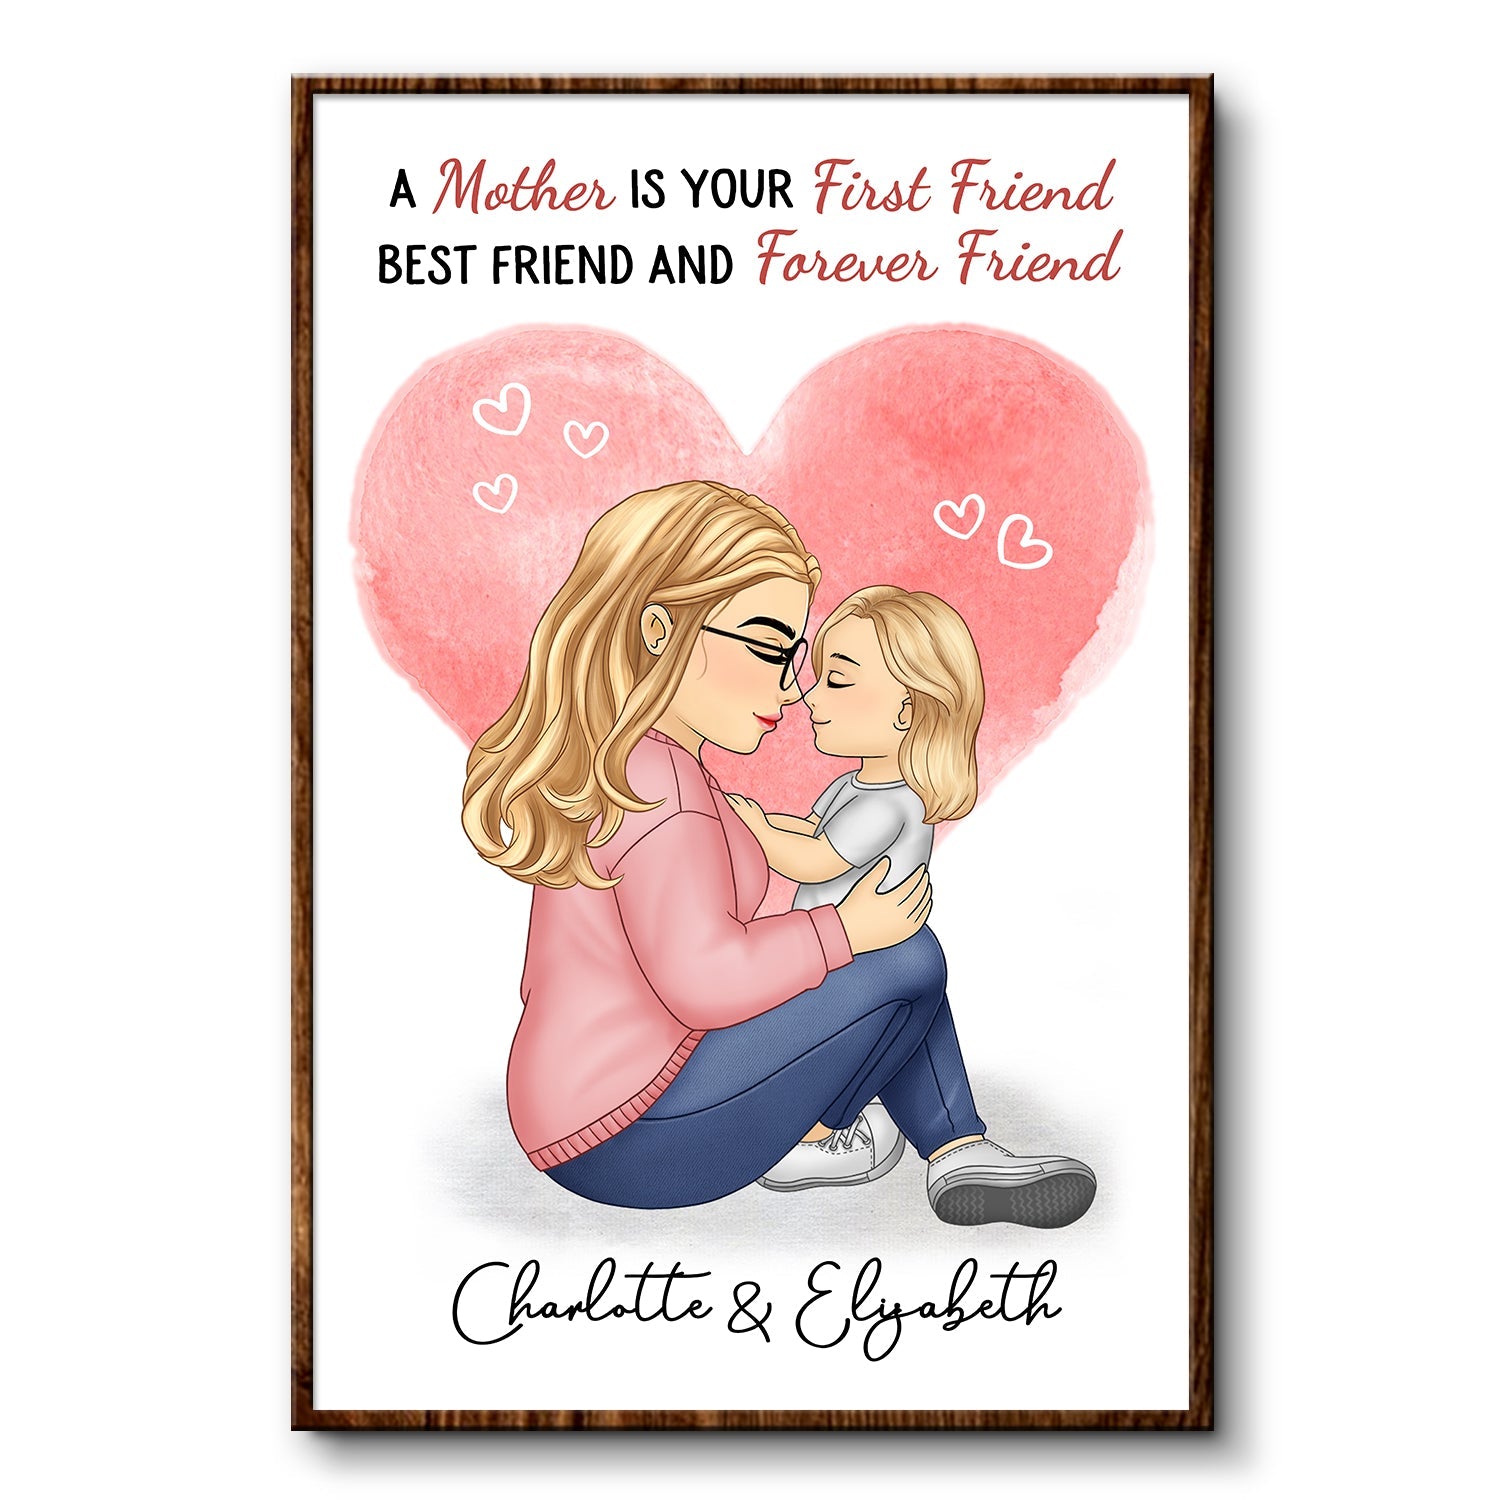 A Mother Is Your First Friend - Gift For Mom, Mama, Mother - Personalized Poster